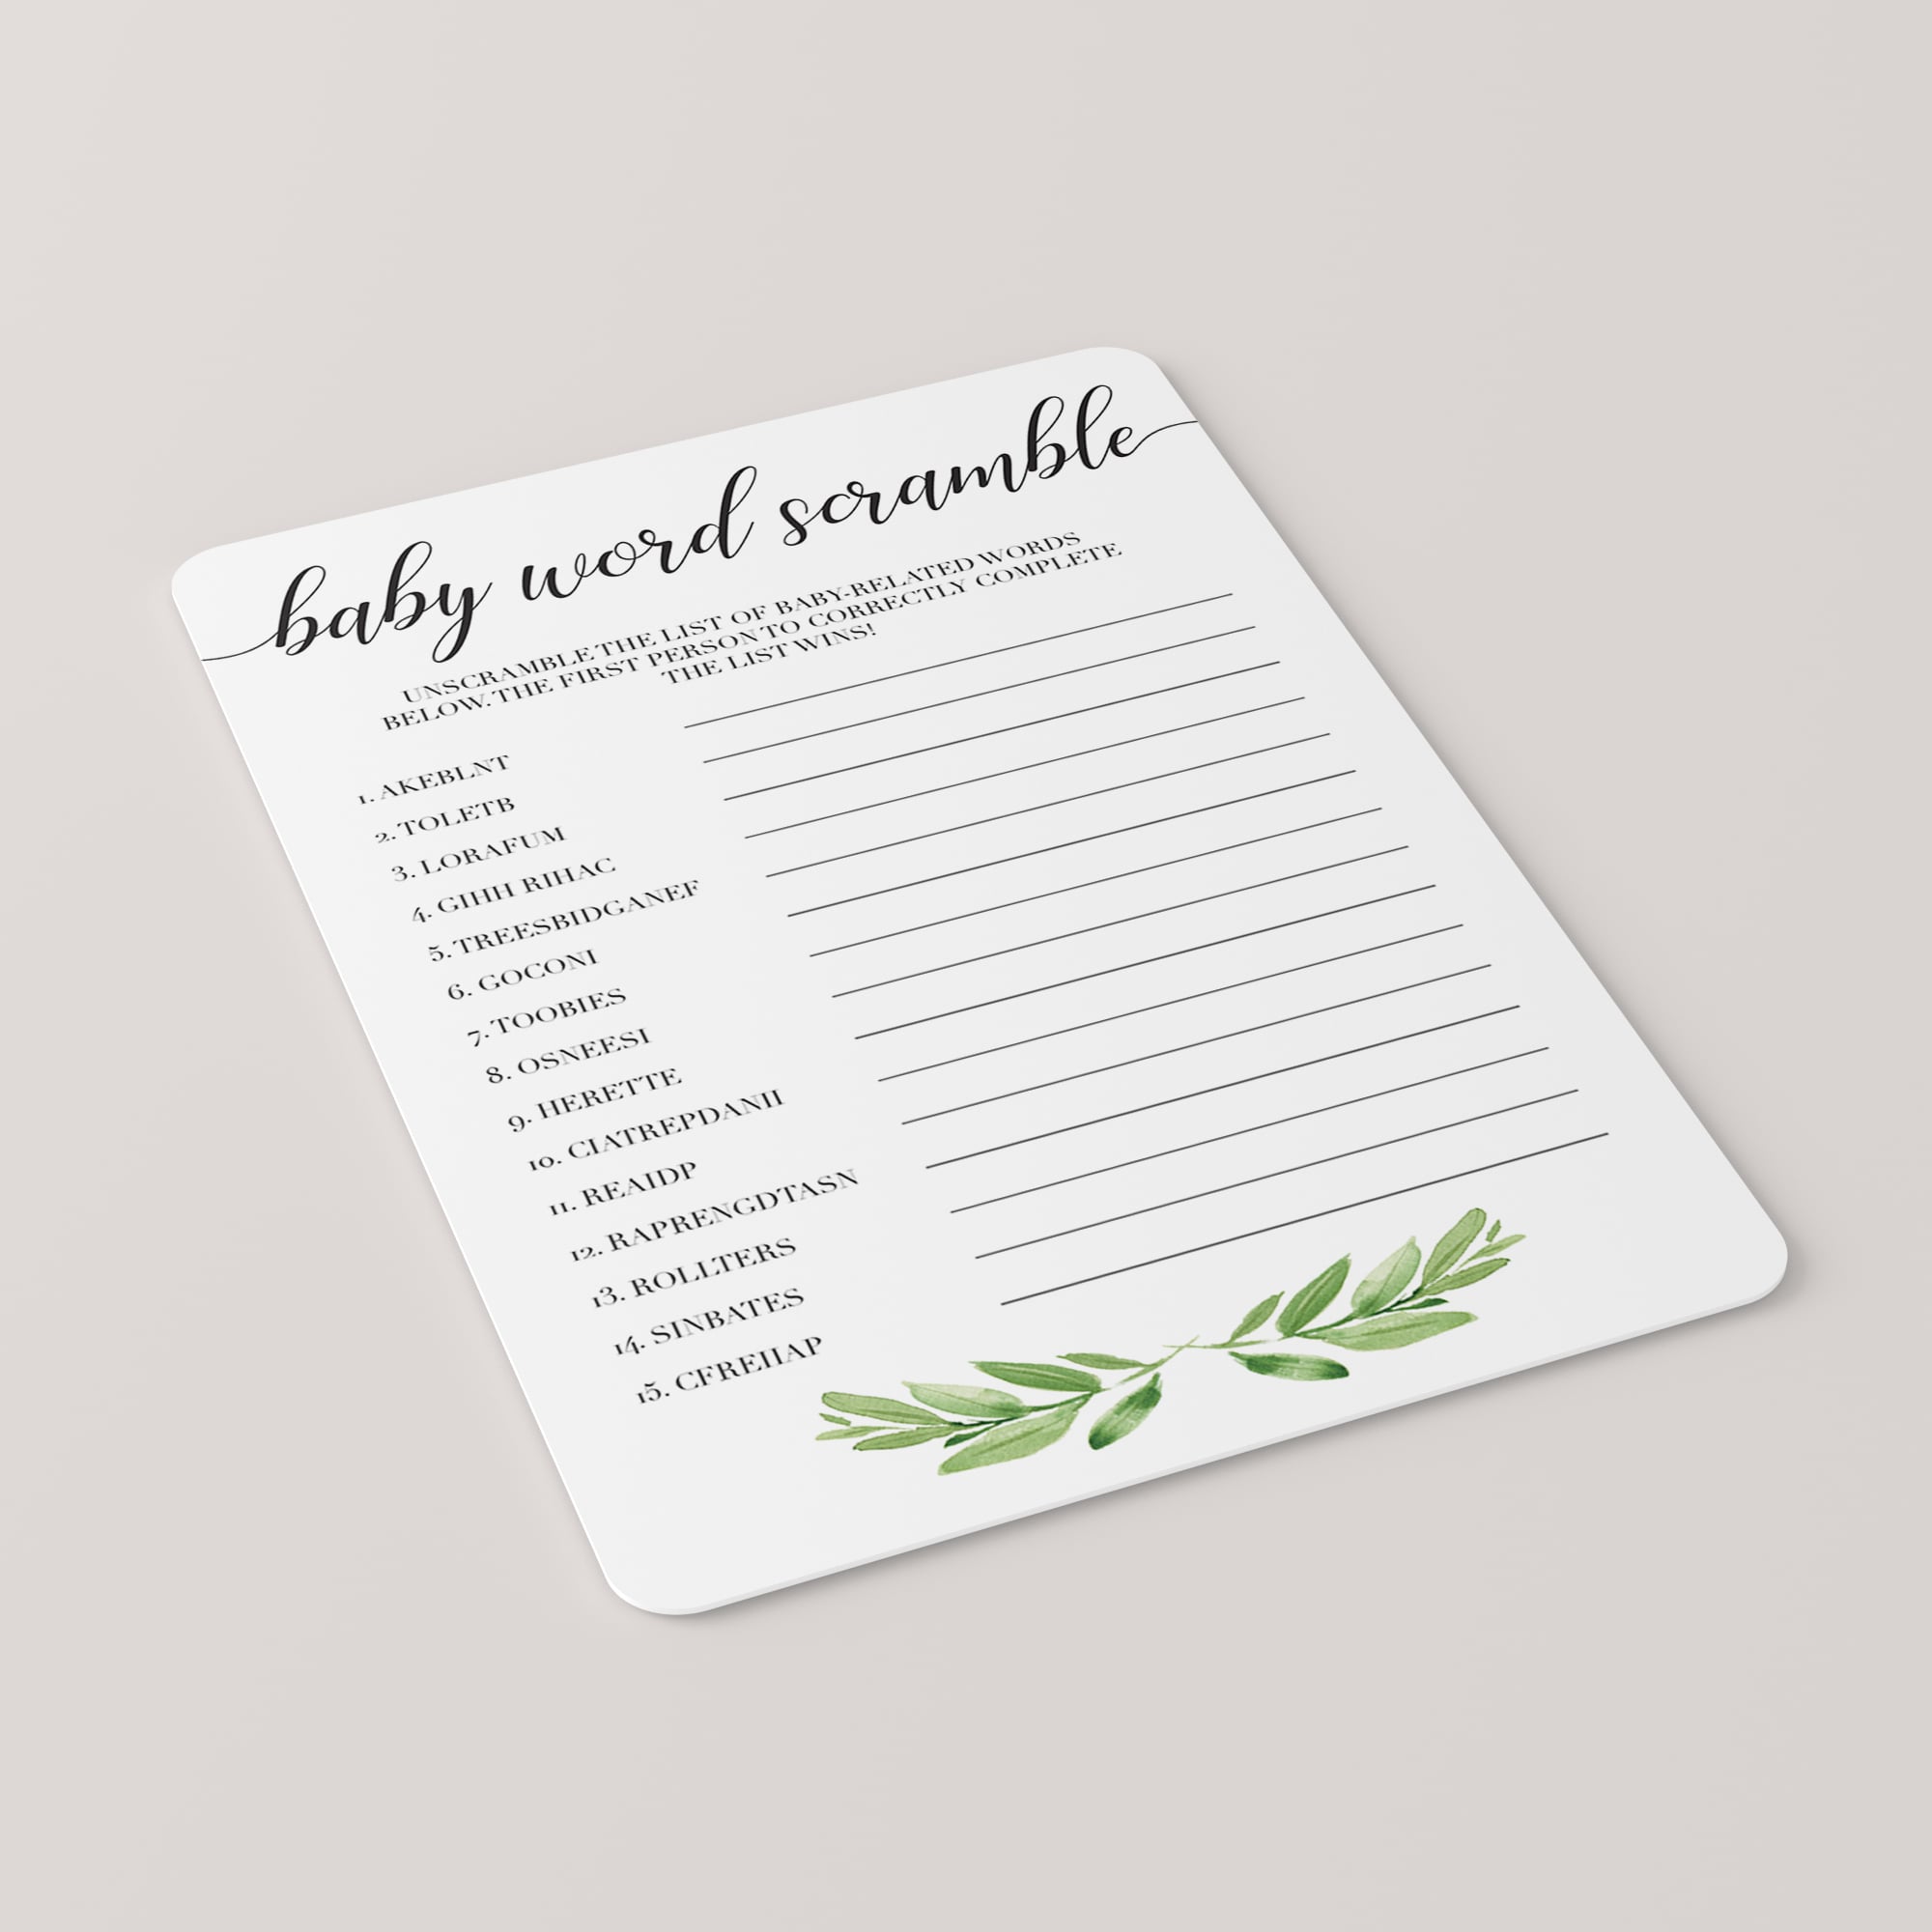 Nursery rhyme quiz answers printable for gender neutral baby shower by LittleSizzle